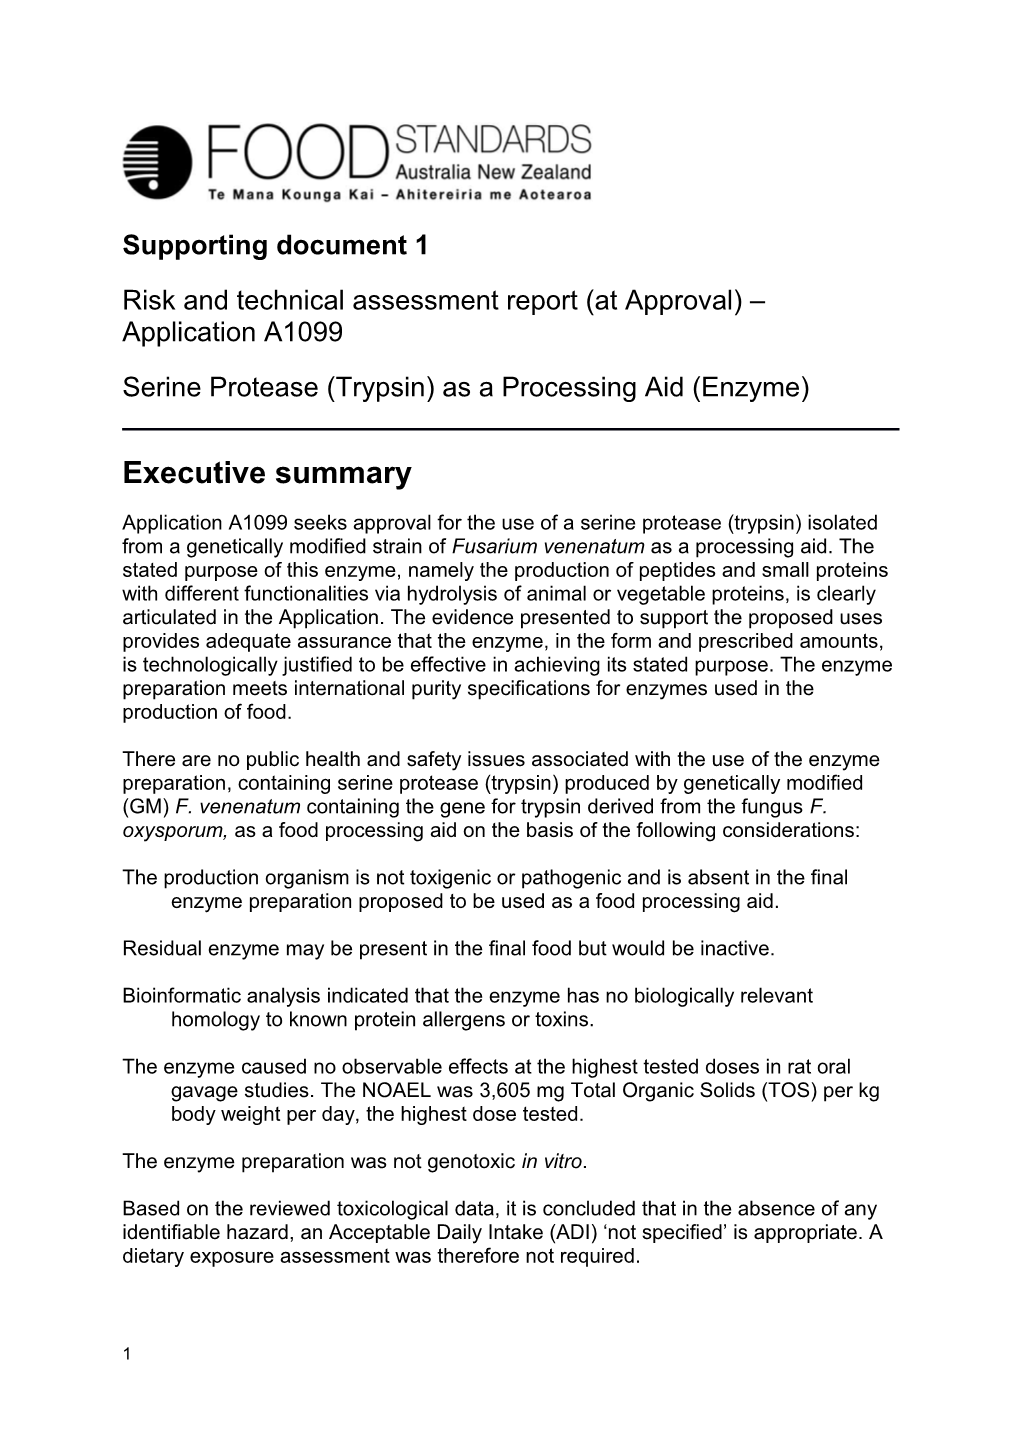 Risk and Technical Assessment Report (At Approval) Application A1099